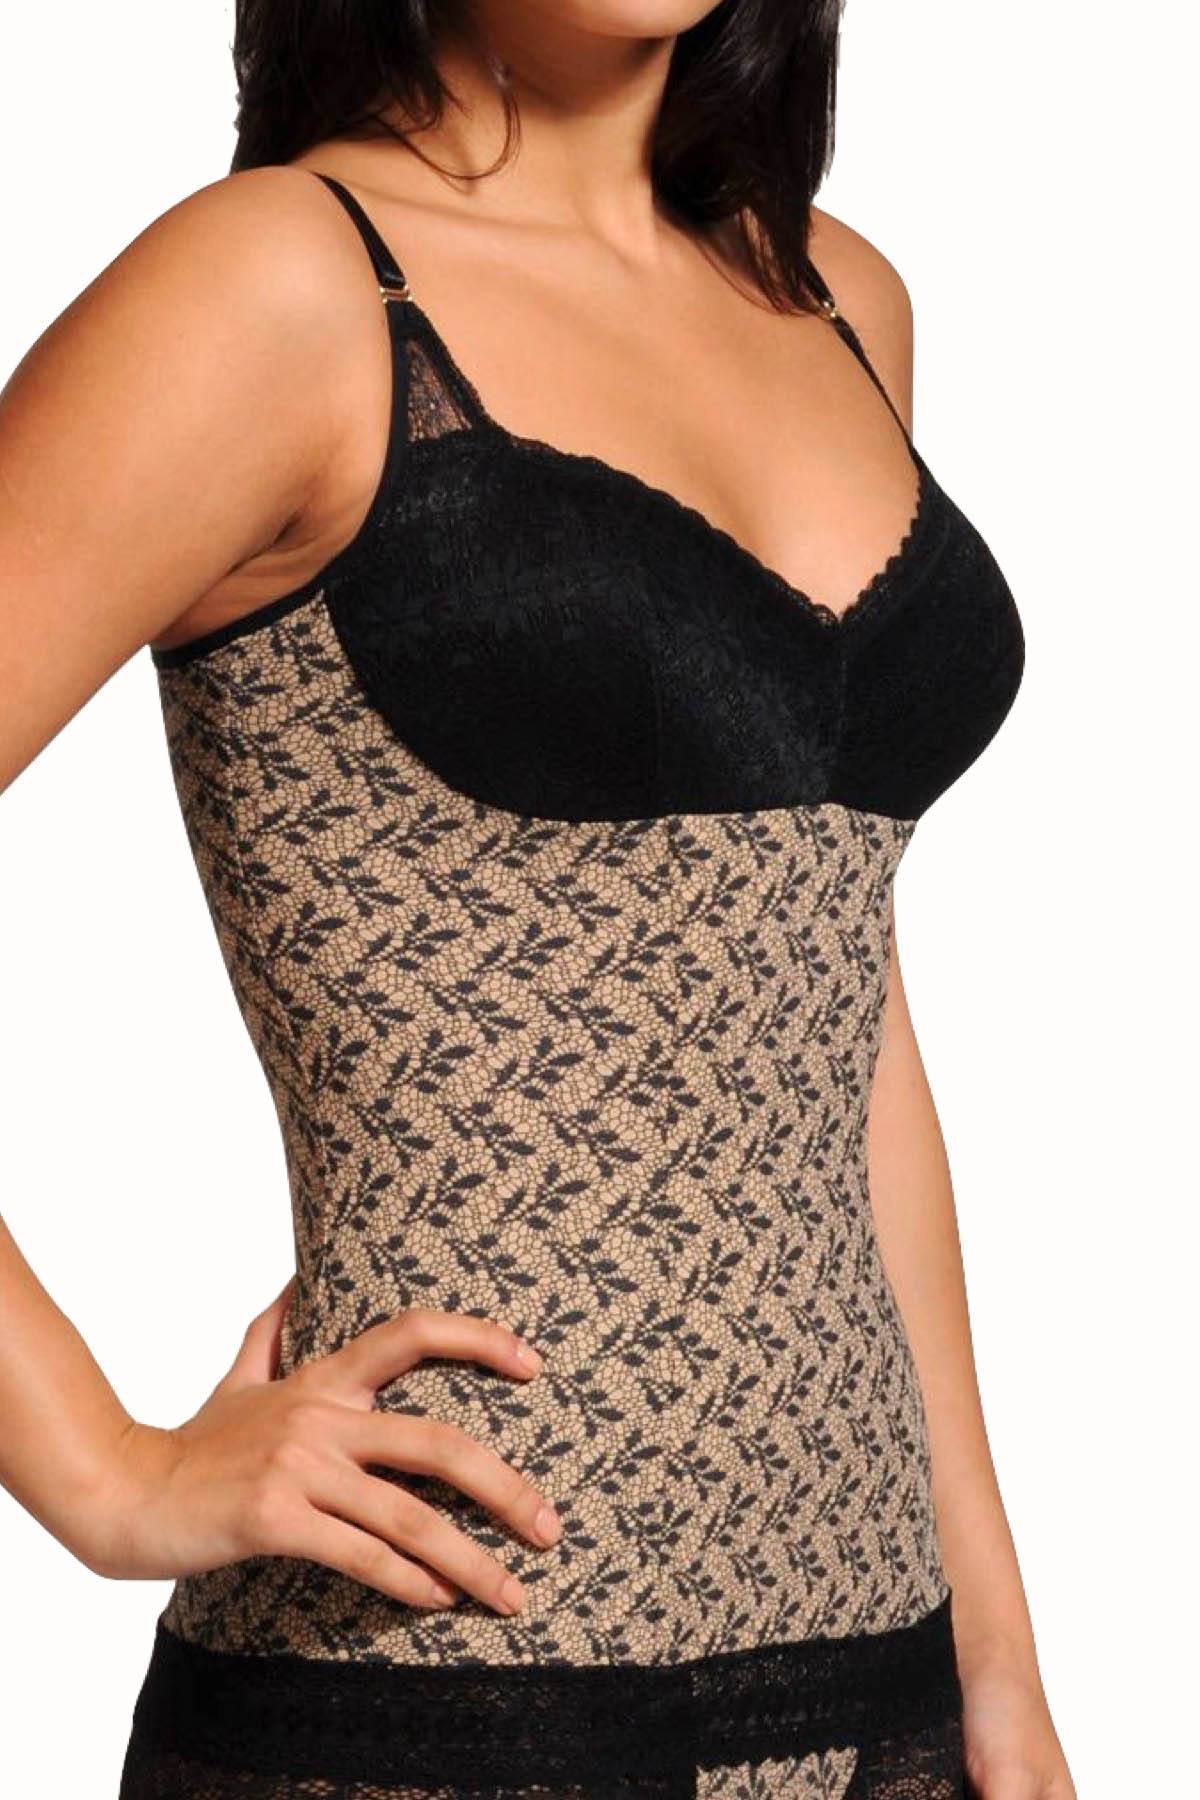 Body Shapers and Shapewear for Women - Bali Light Control Lace